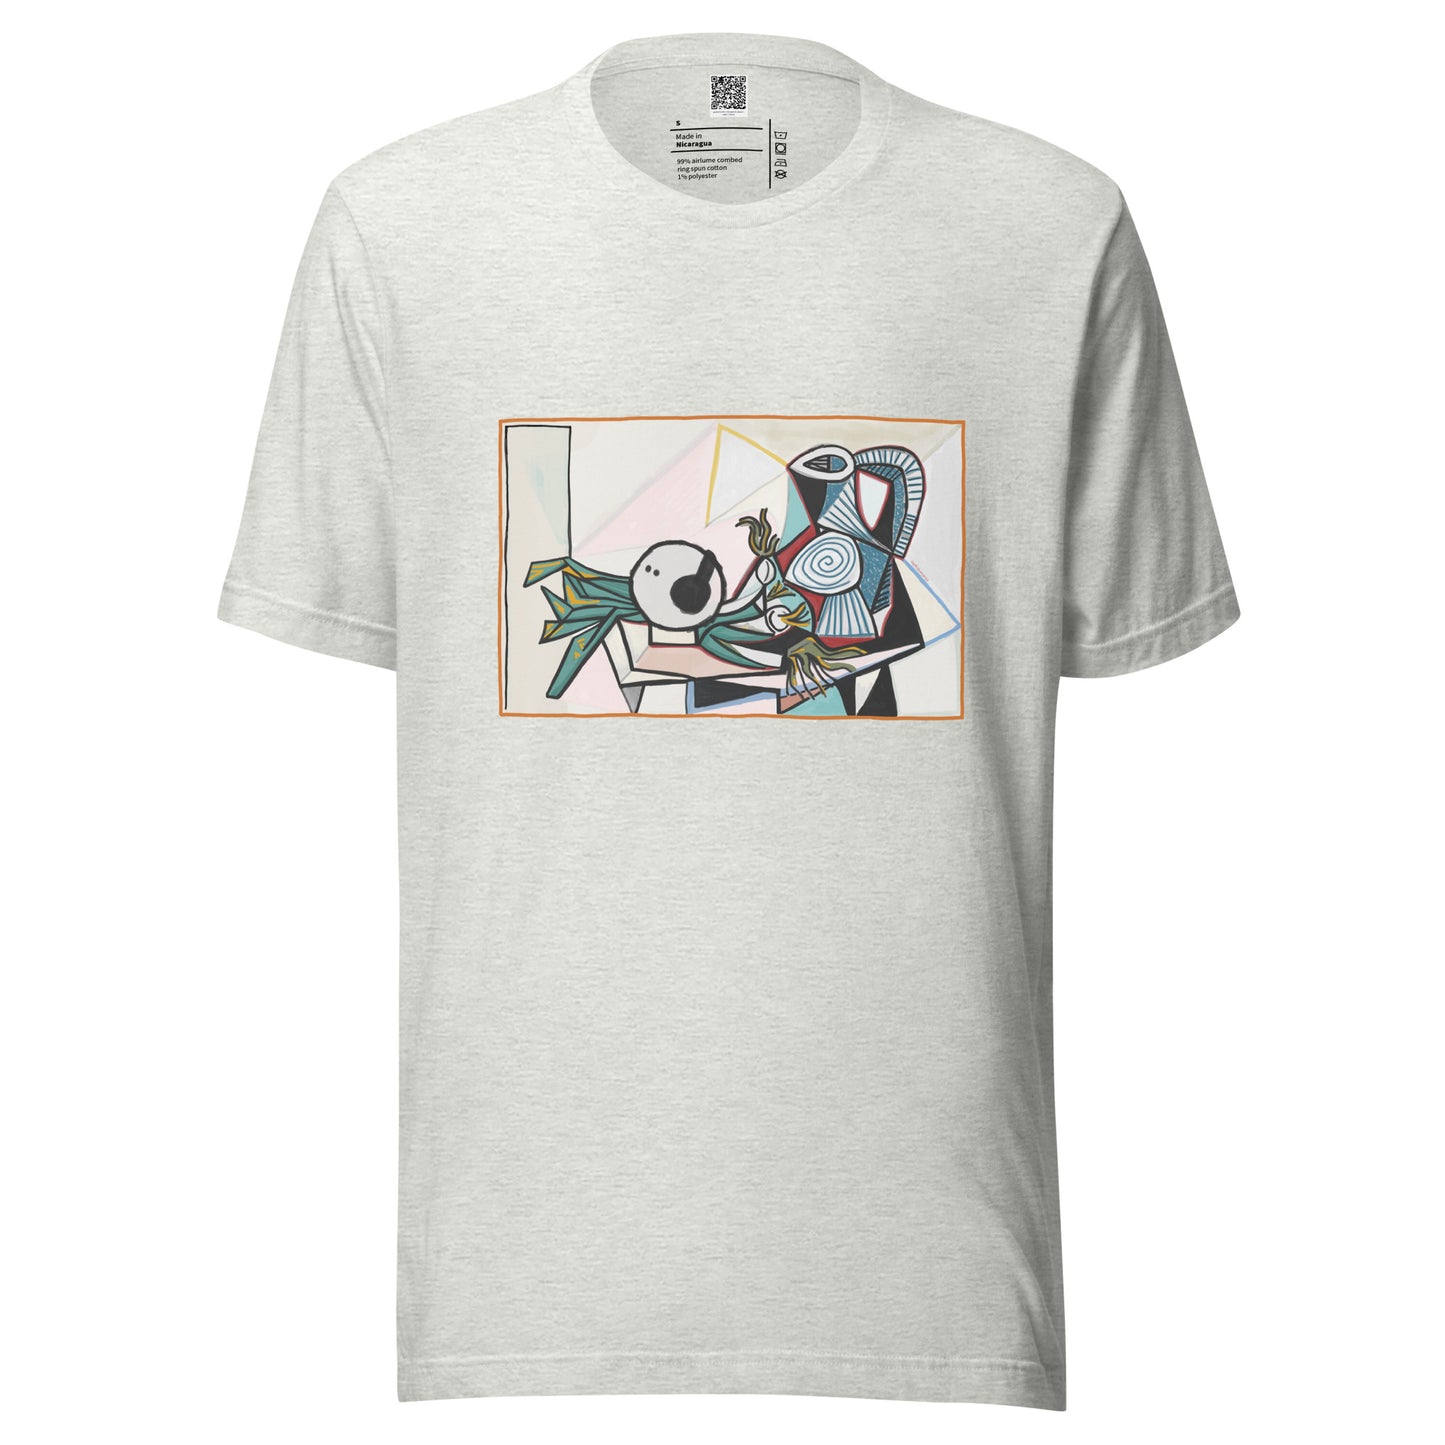 Unisex t-shirt - Still Life with mfer